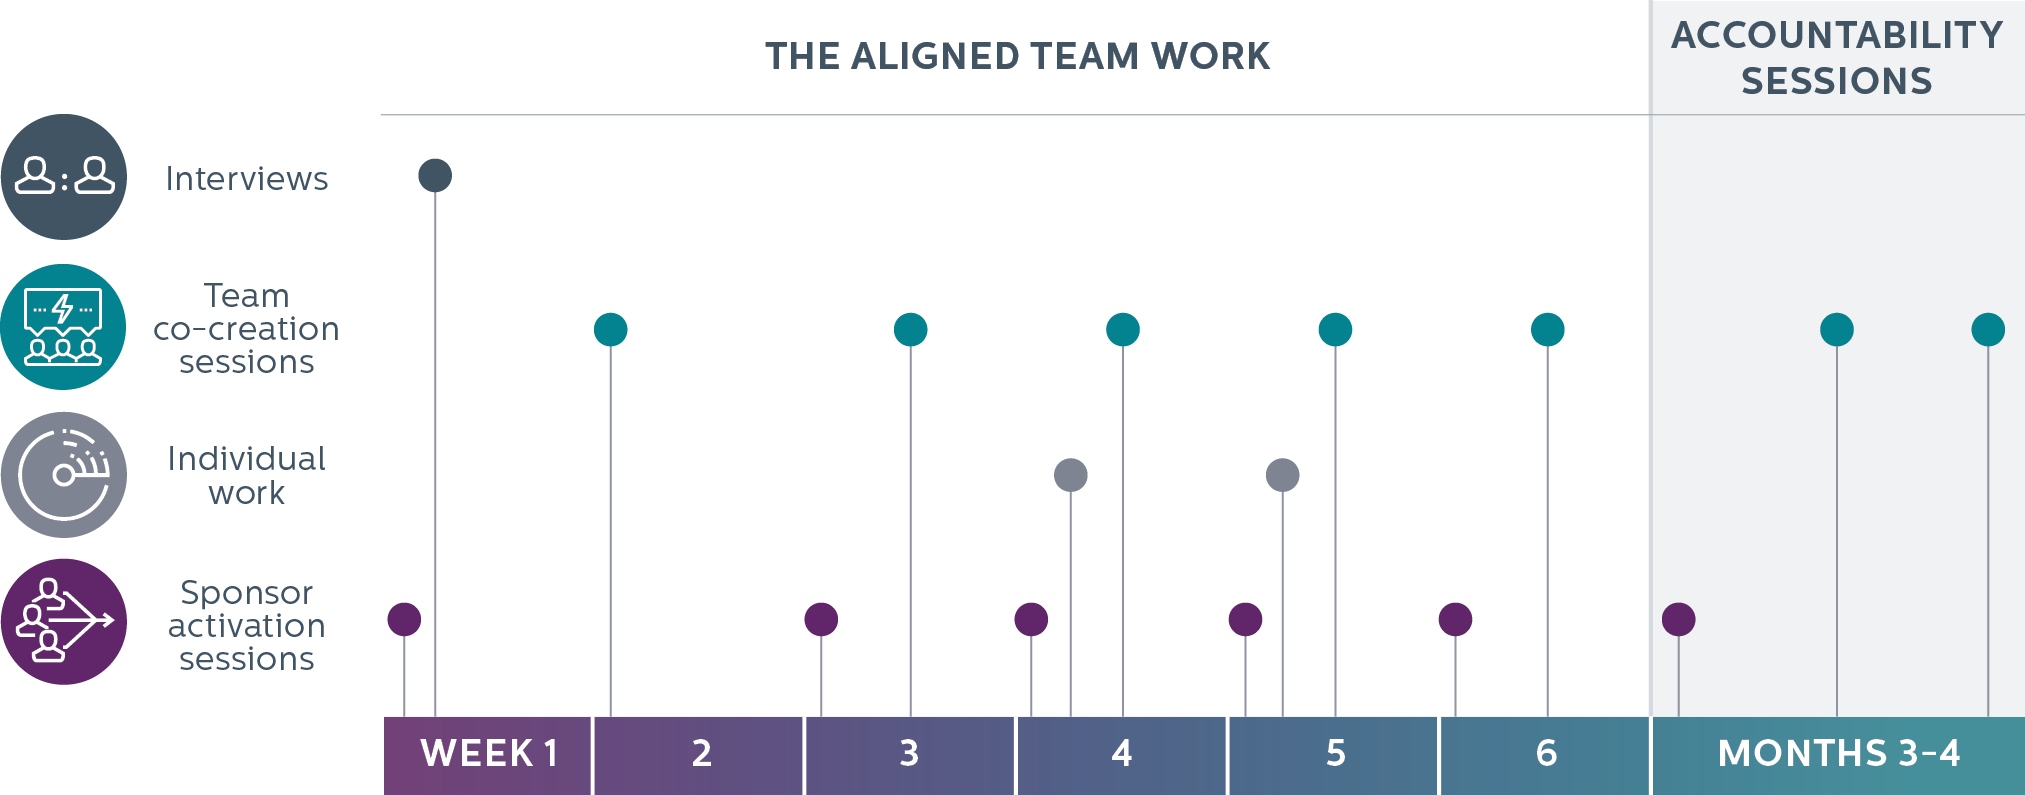 Diagram that shows team touch points during the alignment work and accountability sessions